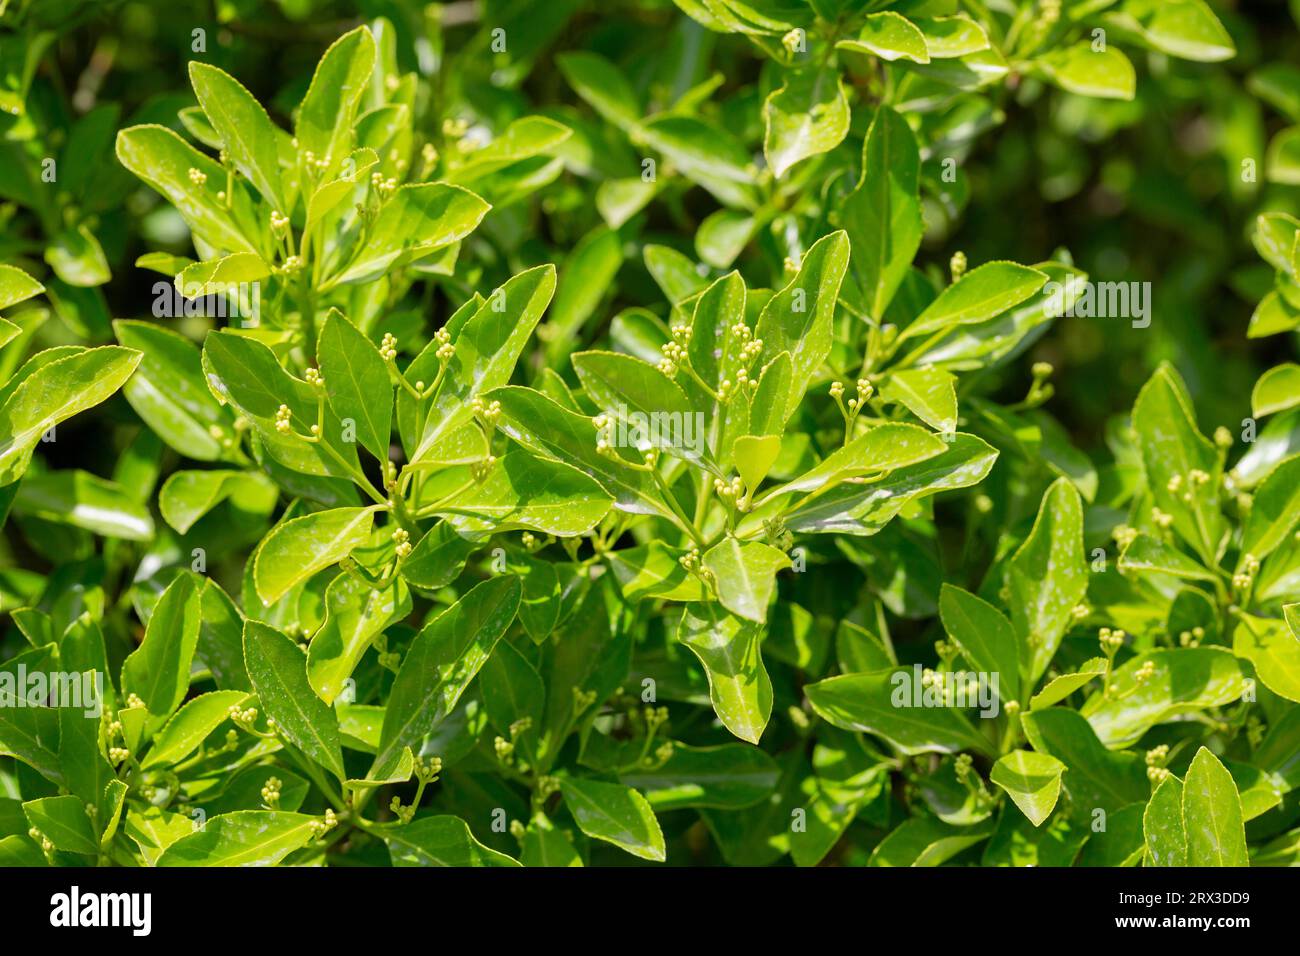 The bright green leaves of evergreen plant Japanese spindle or Euonymus japonicus shrub. The concept of landscape travel and scenic destinations. Stock Photo